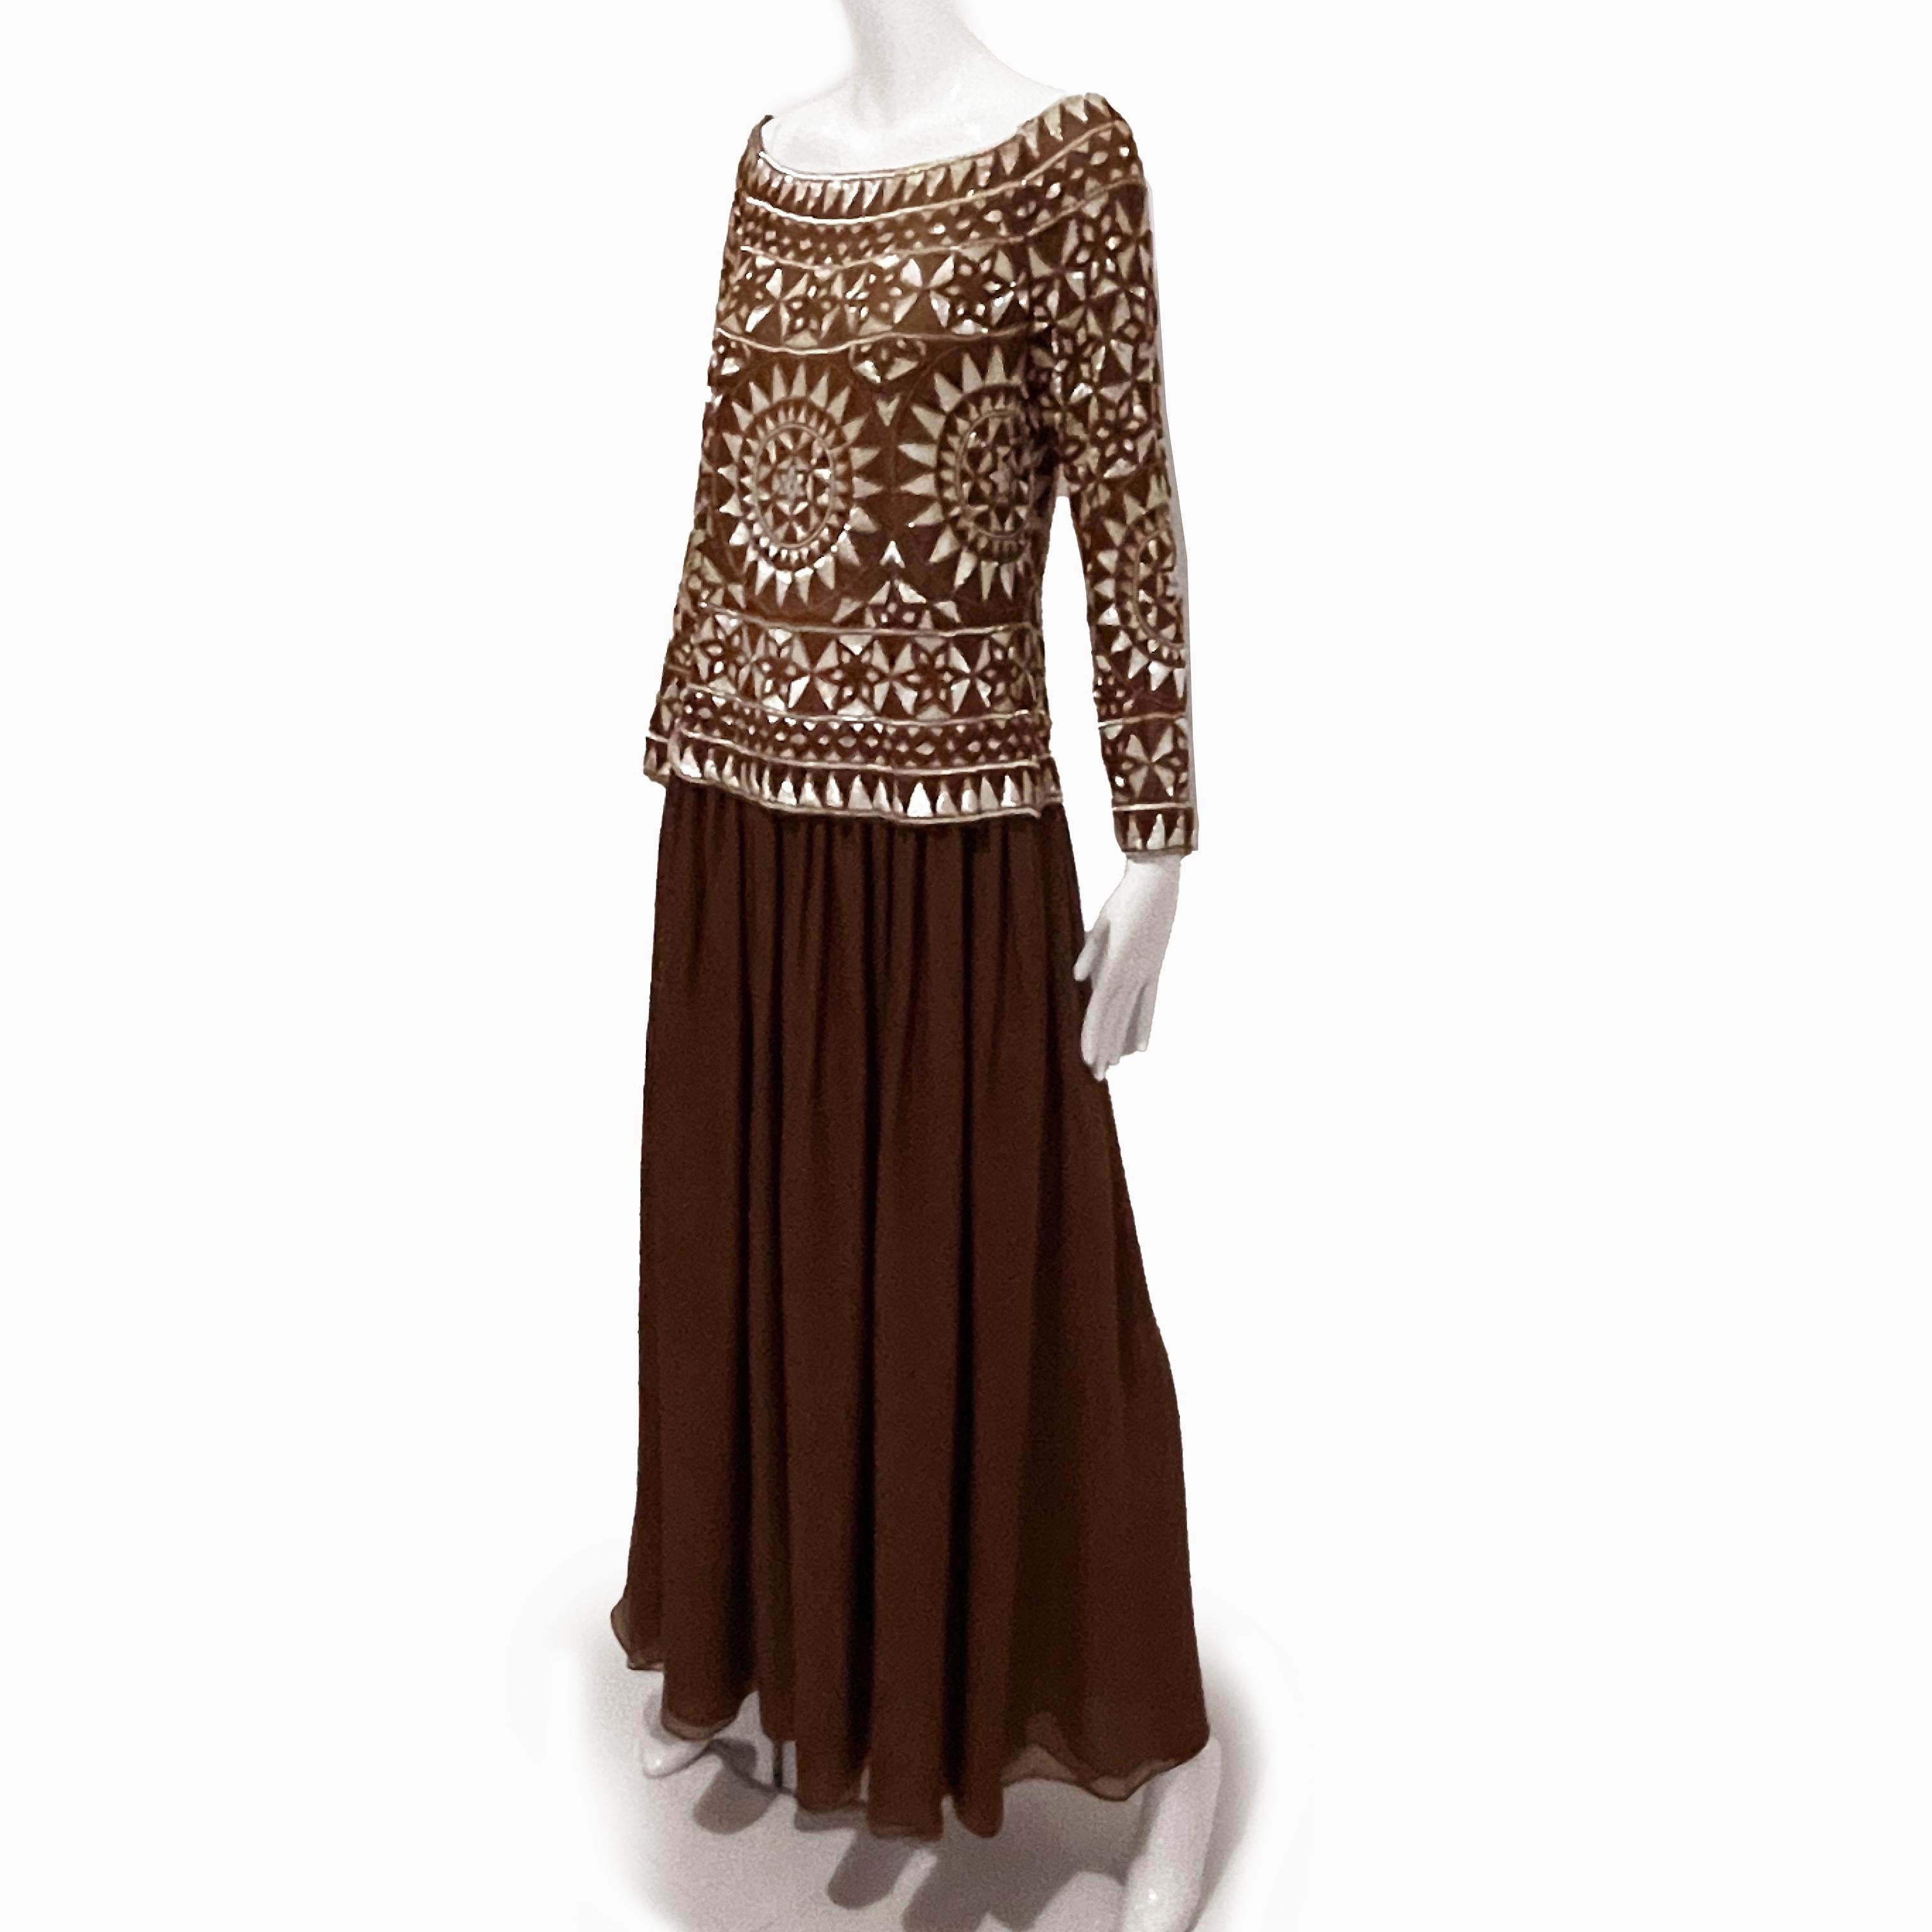 Valentino Evening Gown 2pc Set Documented Formal Beaded Mosaic Vintage S/S 89  For Sale 4